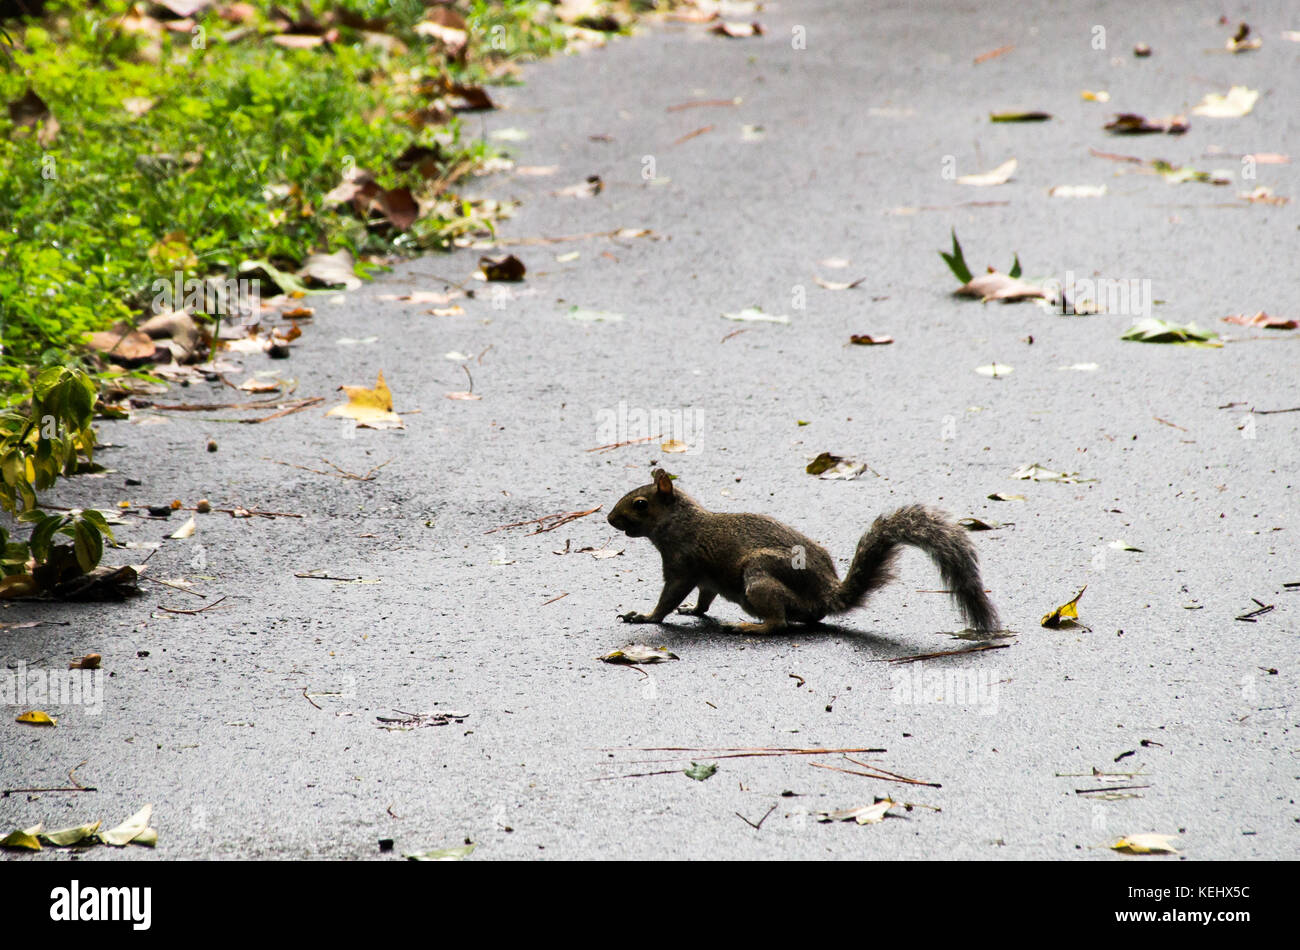 Squirrel on a wet pavement Stock Photo